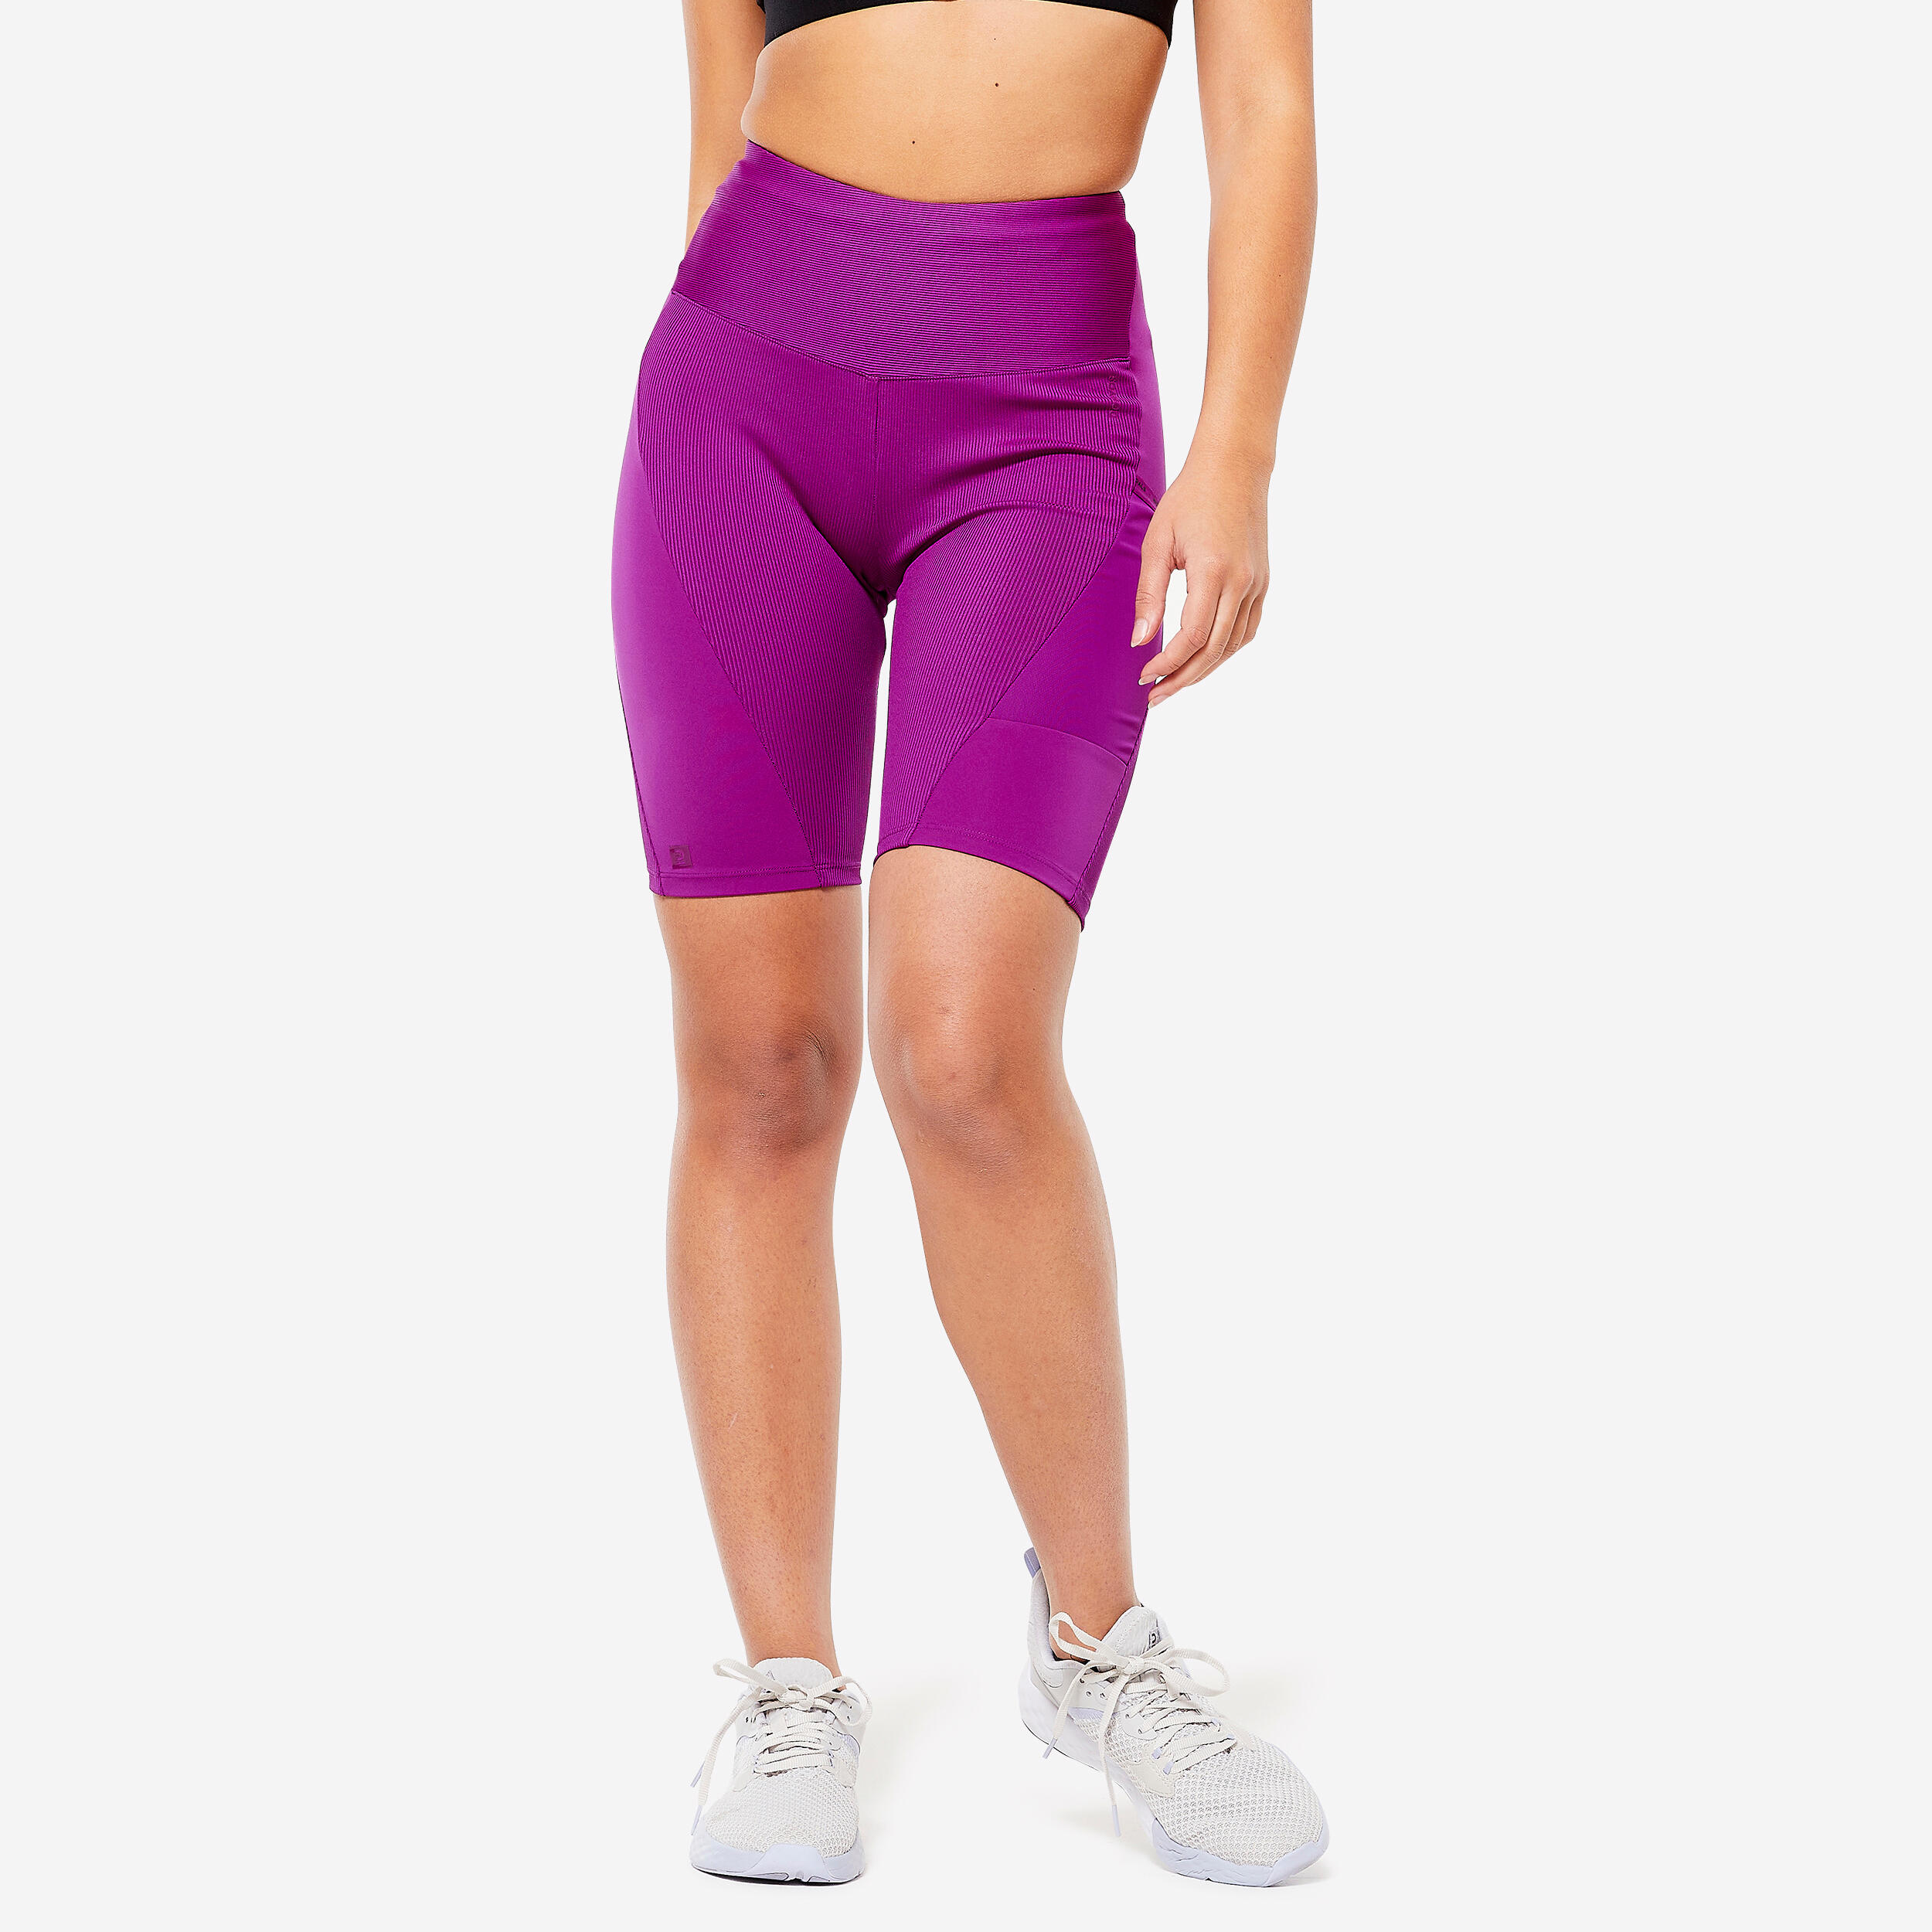 lycra dance shorts for Fitness, Functionality and Style 